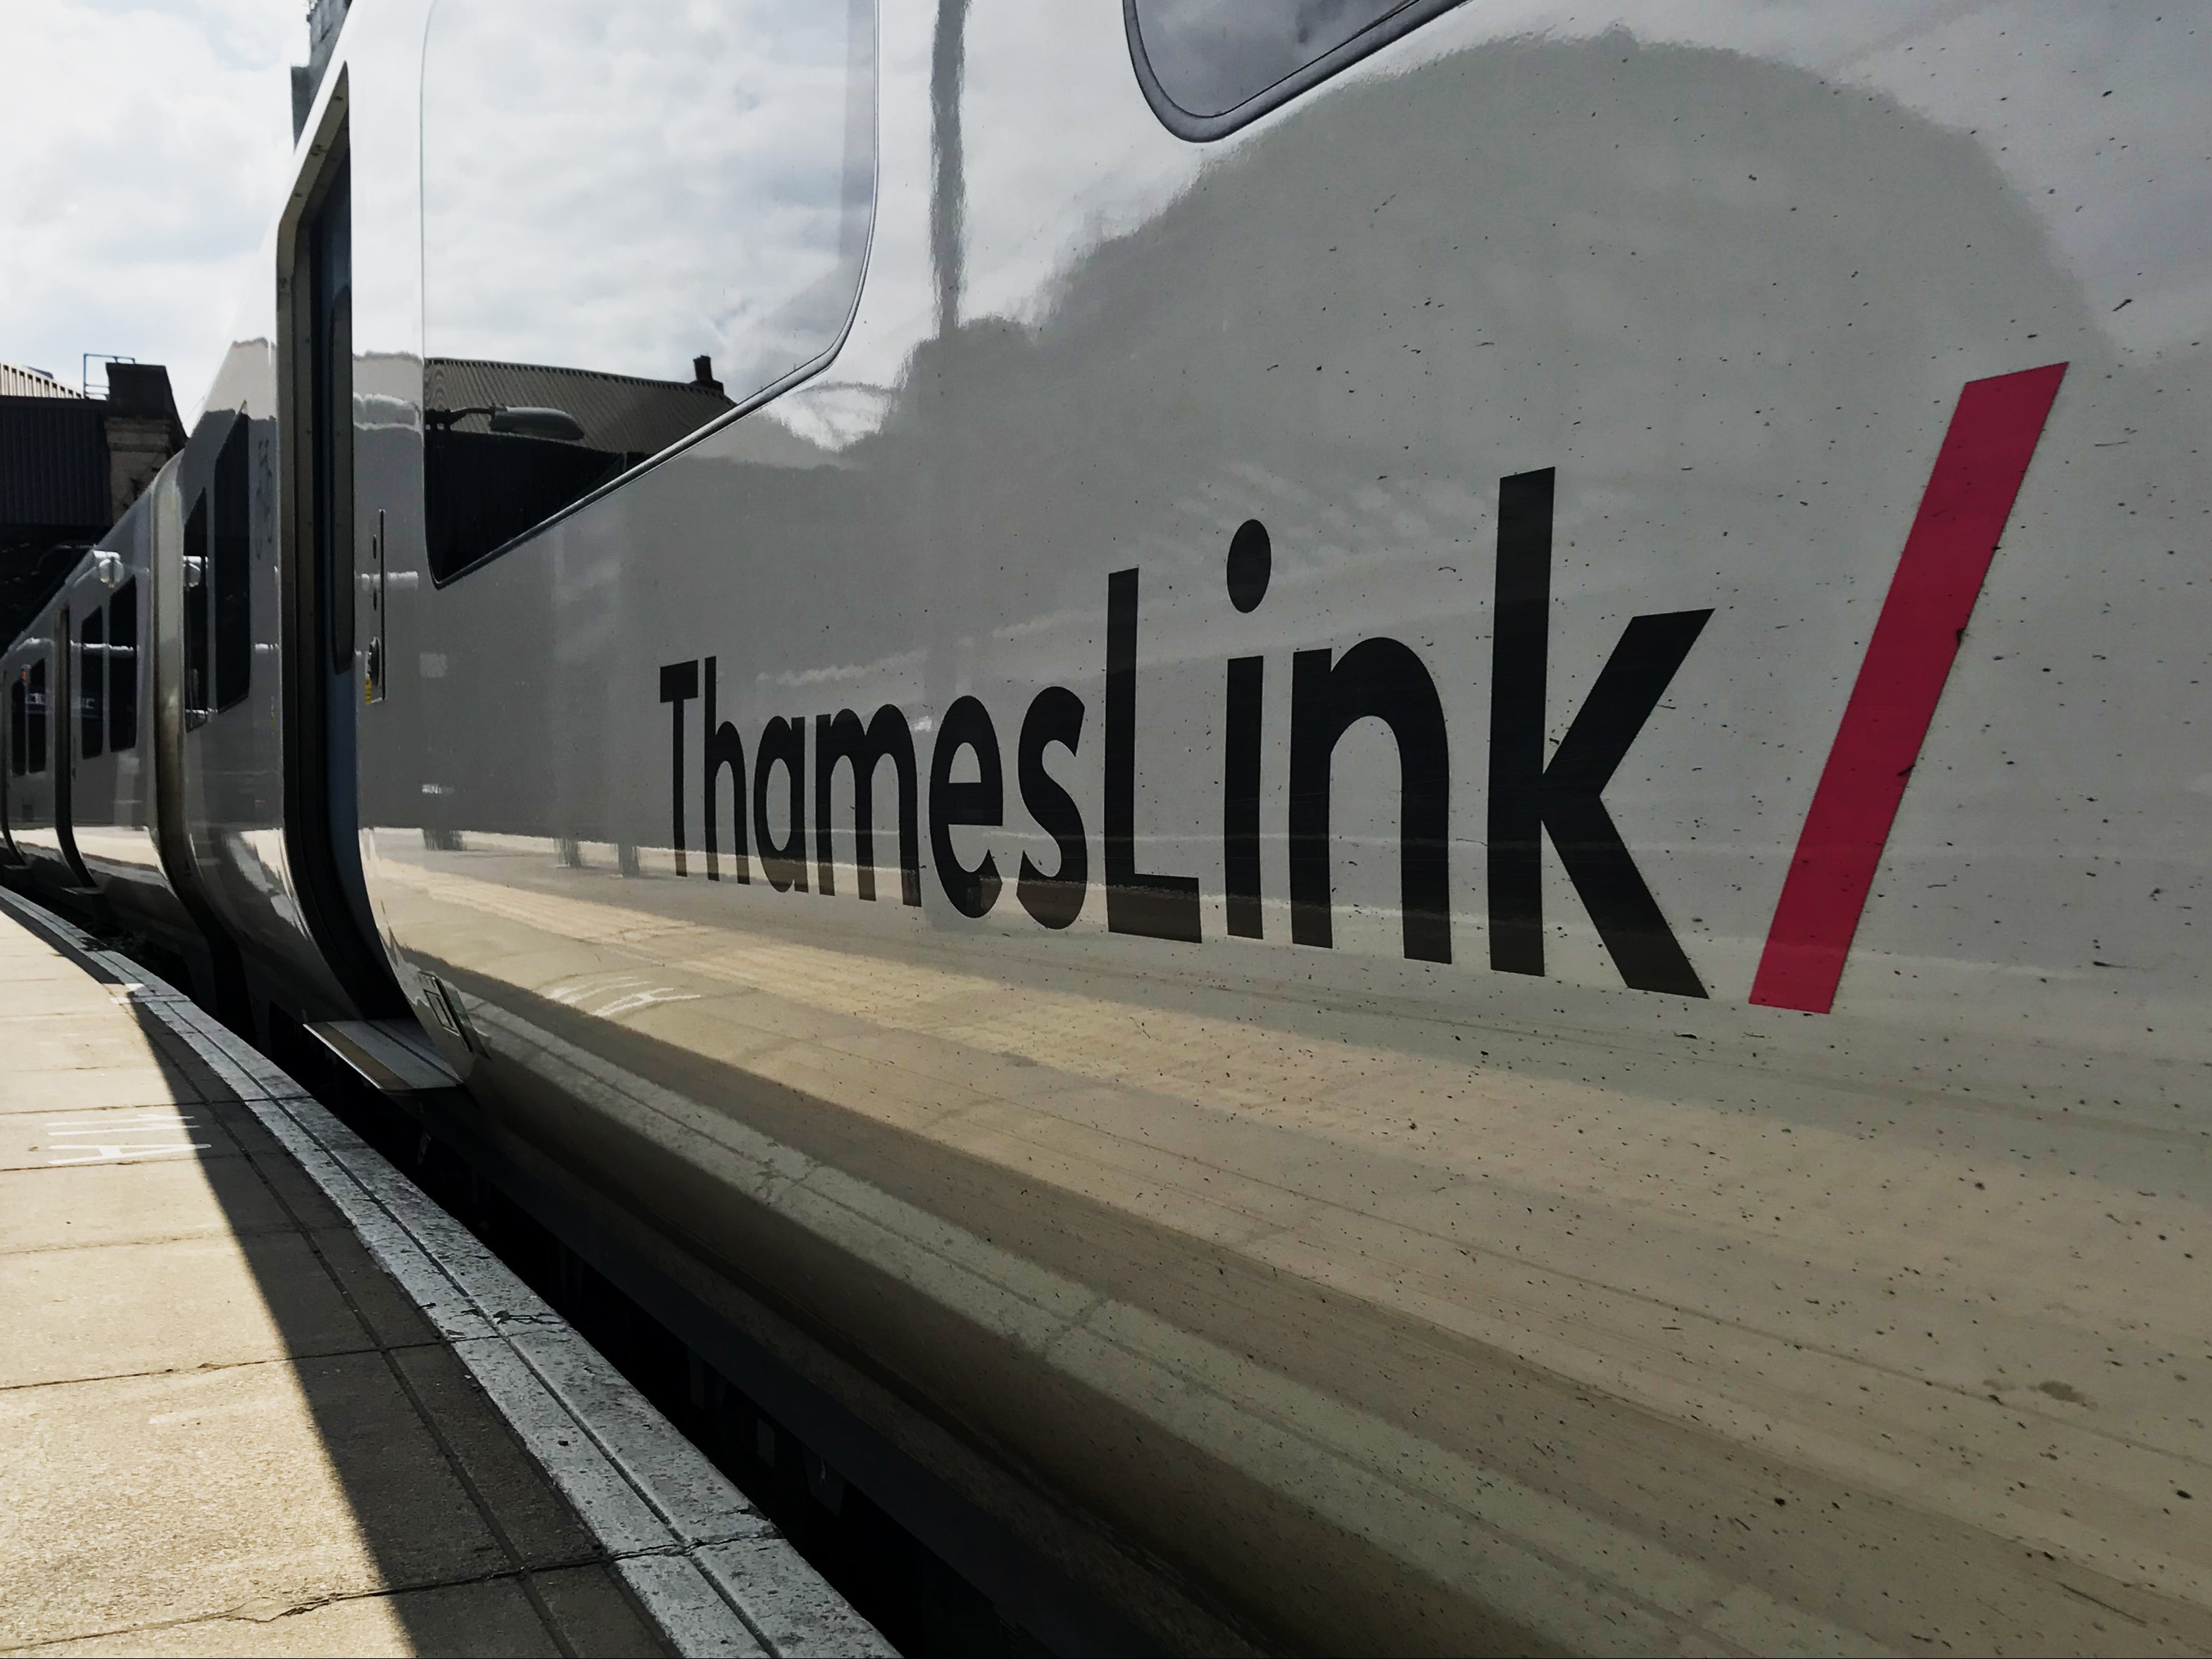 Actionable traces of legionella were found in seven toilets on four Thameslink trains